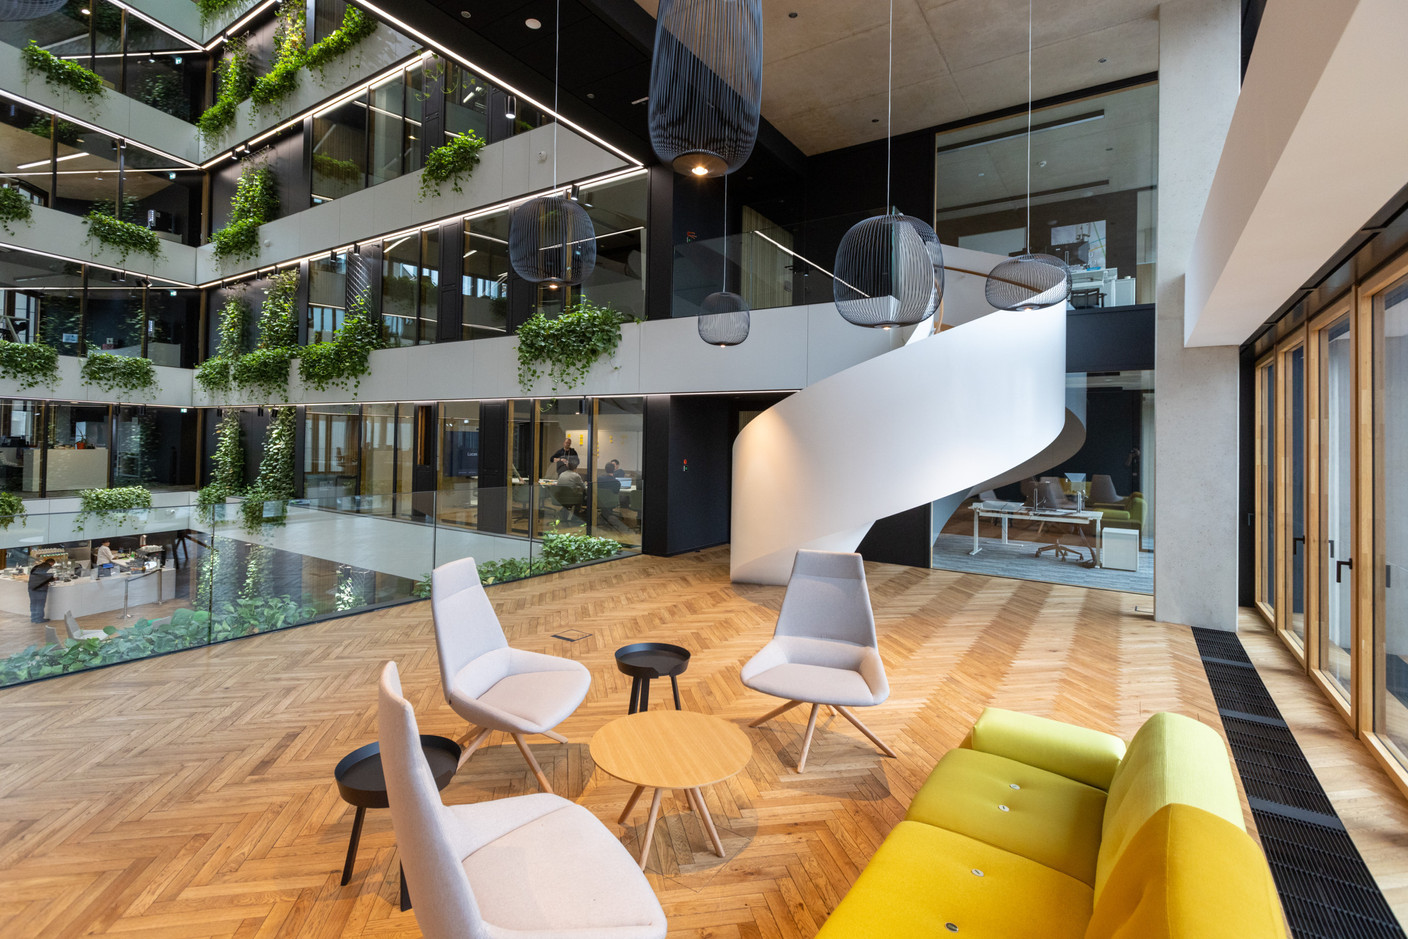 This was the location for the offices. Today, for the comfort and well-being of the teams, these surfaces have been transformed into interior terraces. Photo: Romain Gamba/Maison Moderne